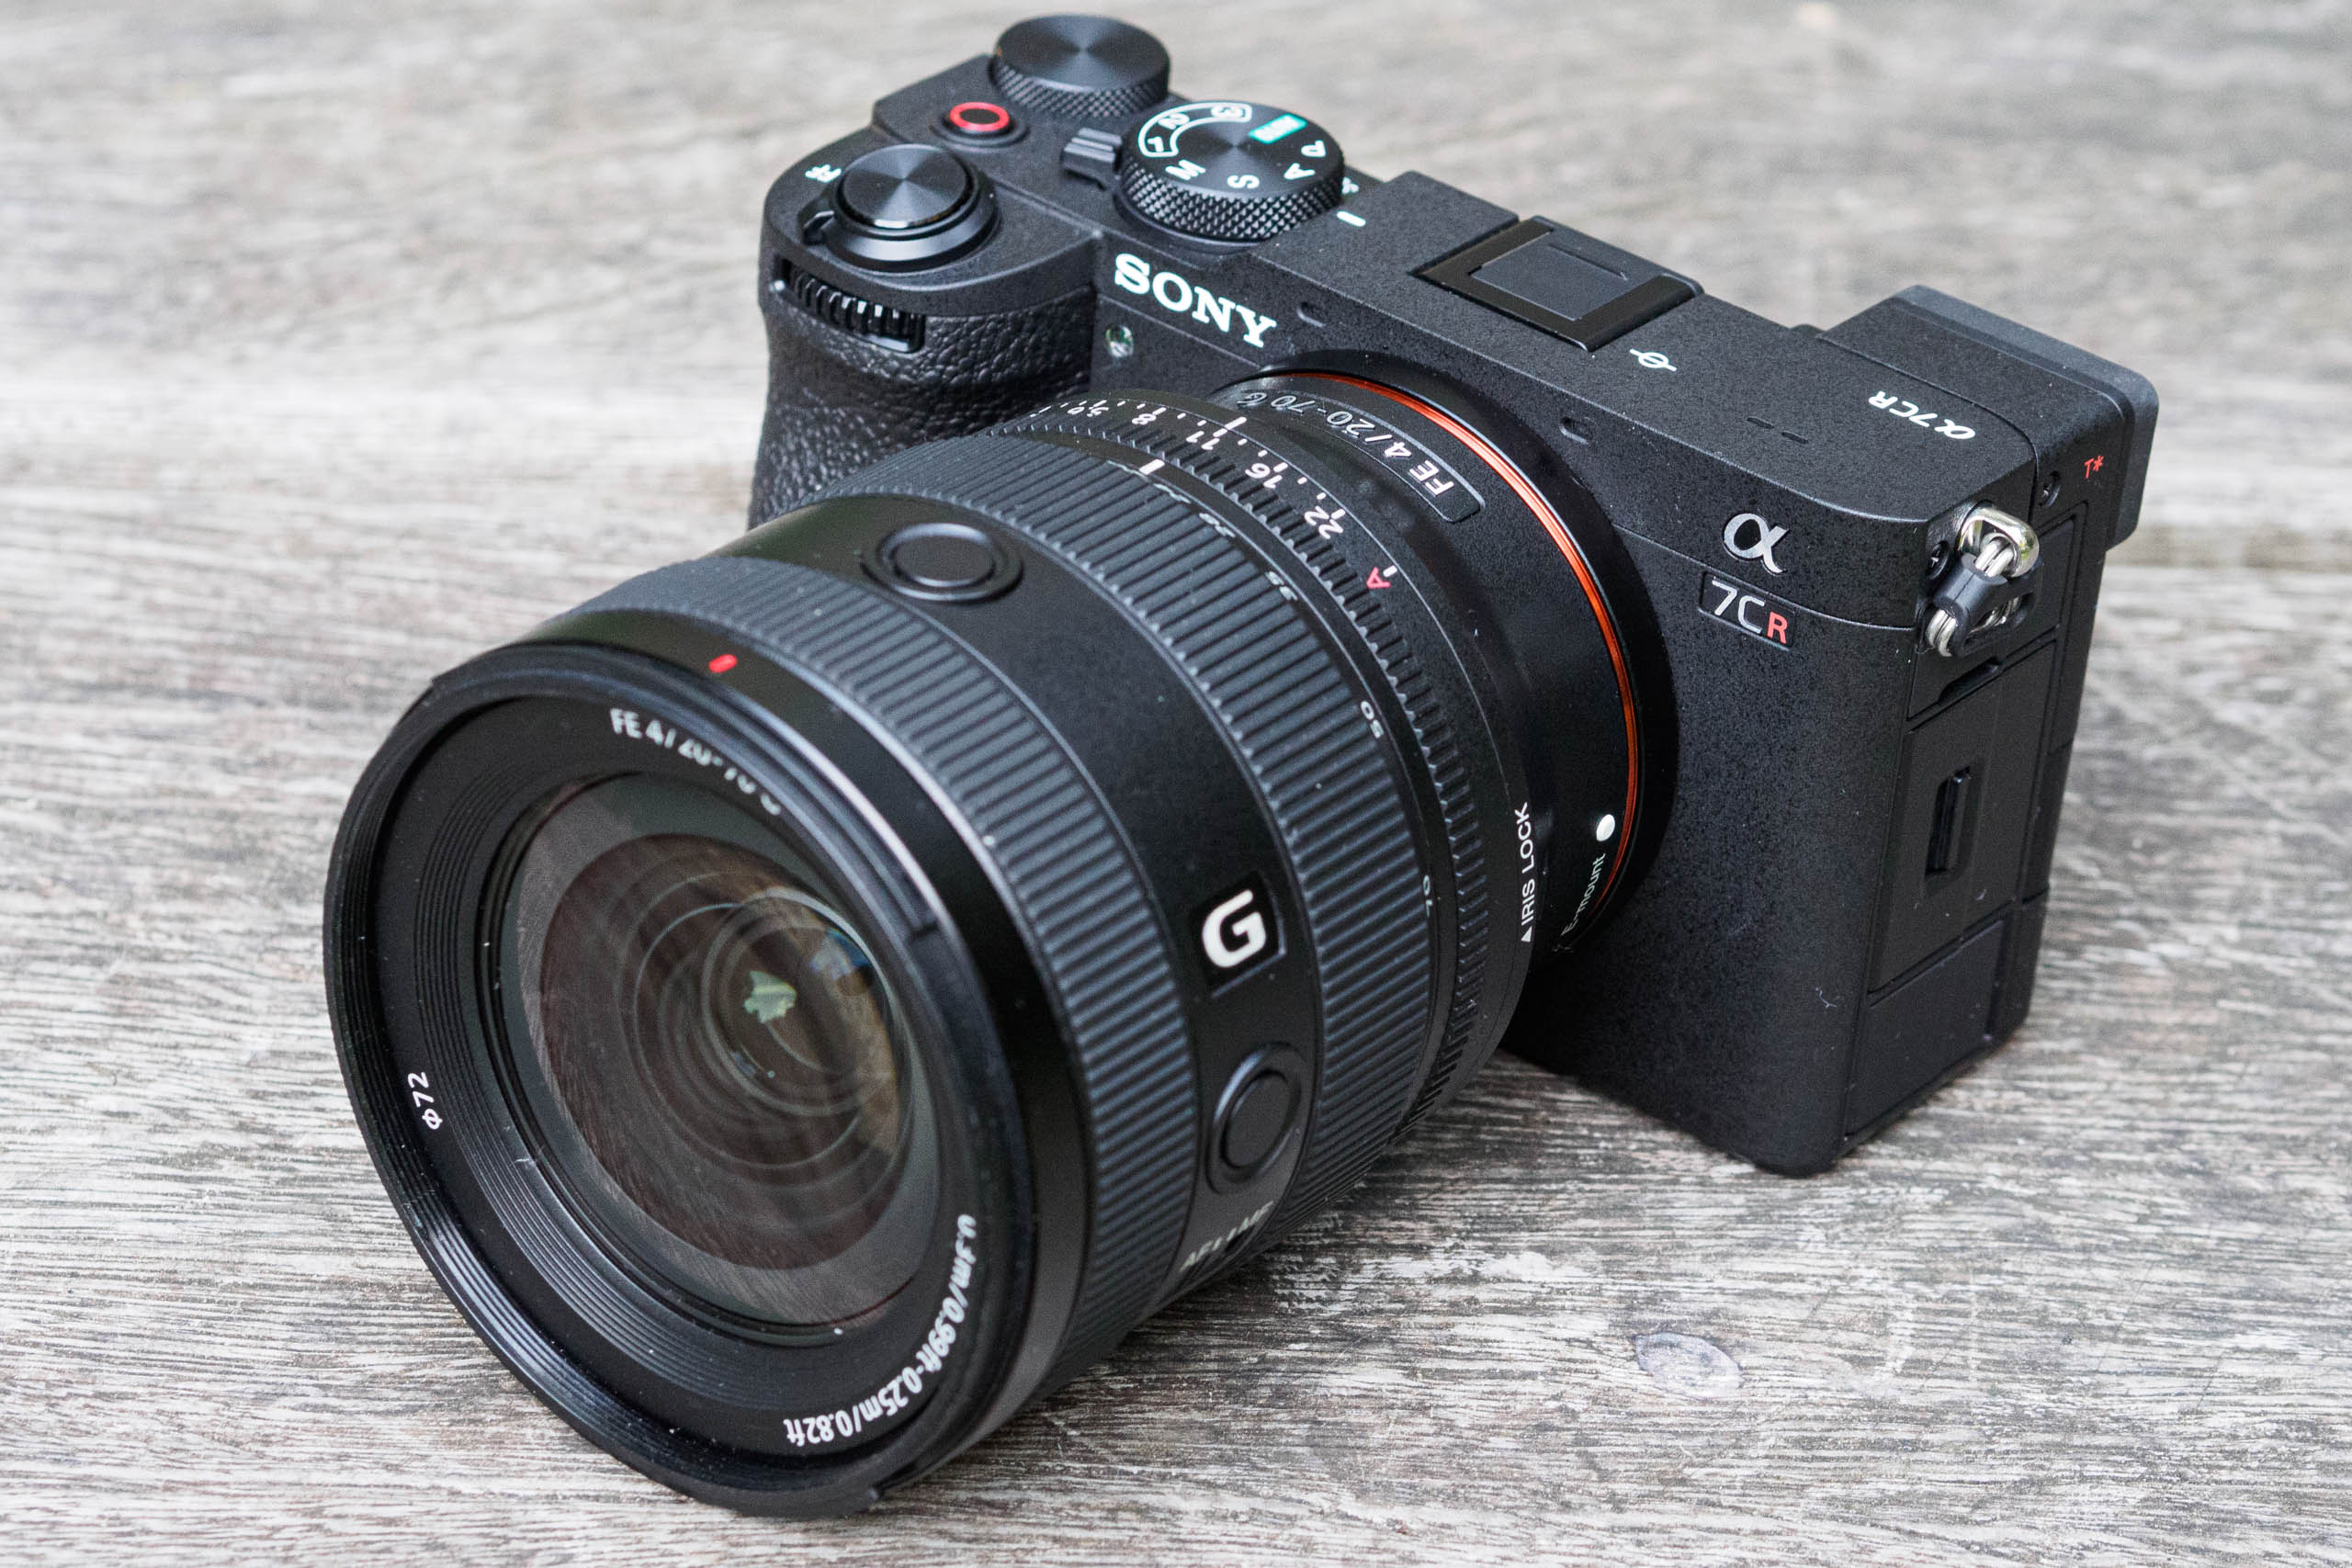 Sony Alpha 7C or Sony Alpha 7 III - which is better? - Amateur